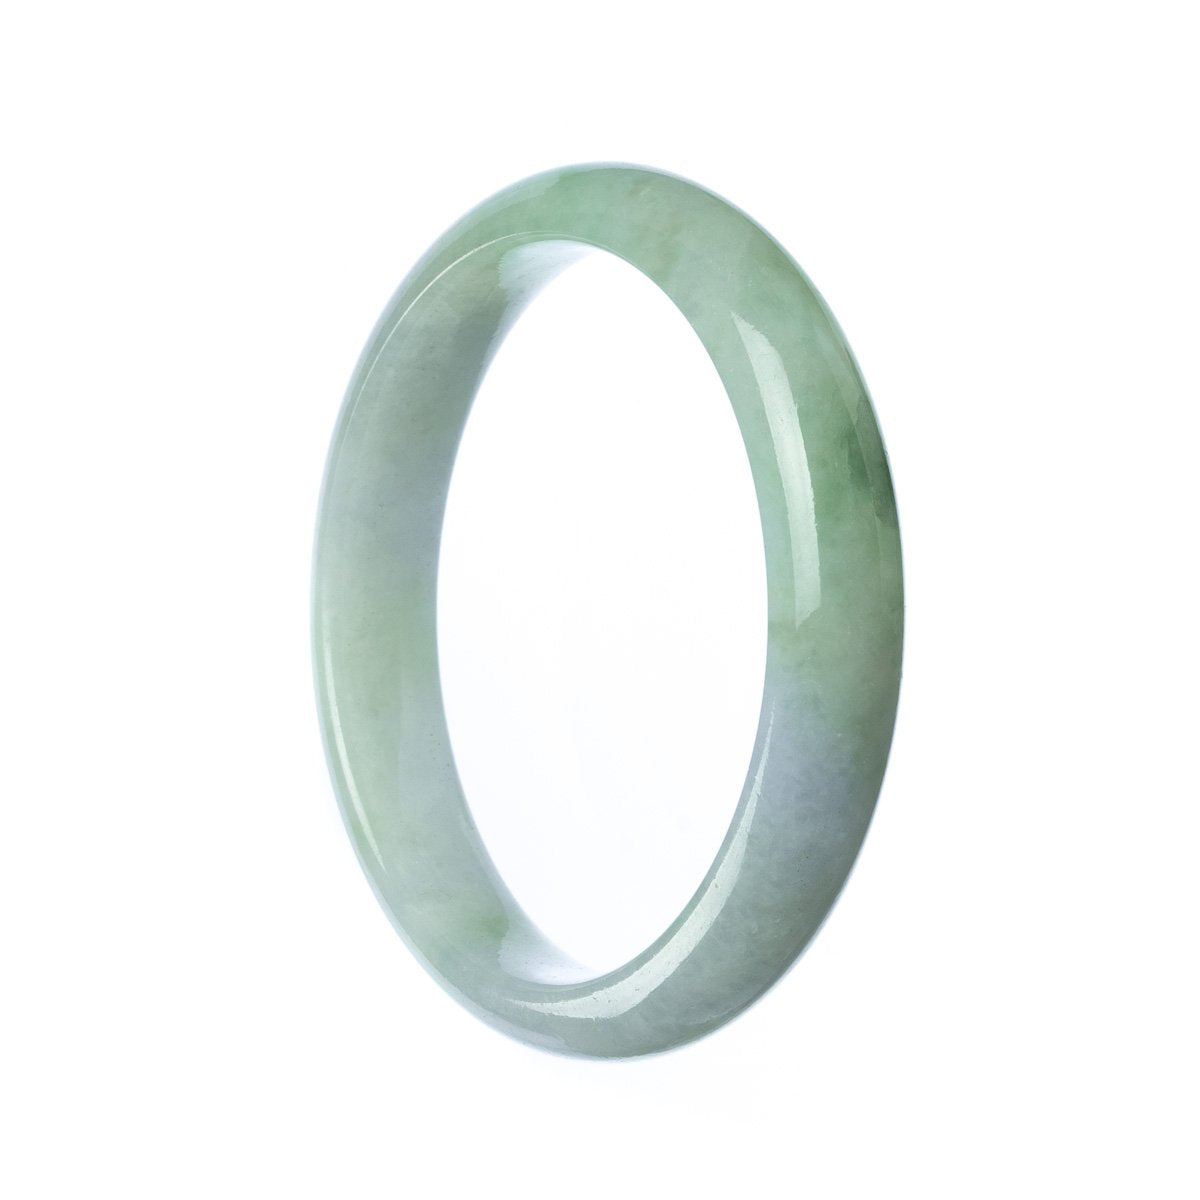 A close-up image of an authentic Grade A Pale Green Jadeite Bangle. The bangle is in the shape of a half moon and has a diameter of 57mm. It is a beautiful piece of jewelry from MAYS™.